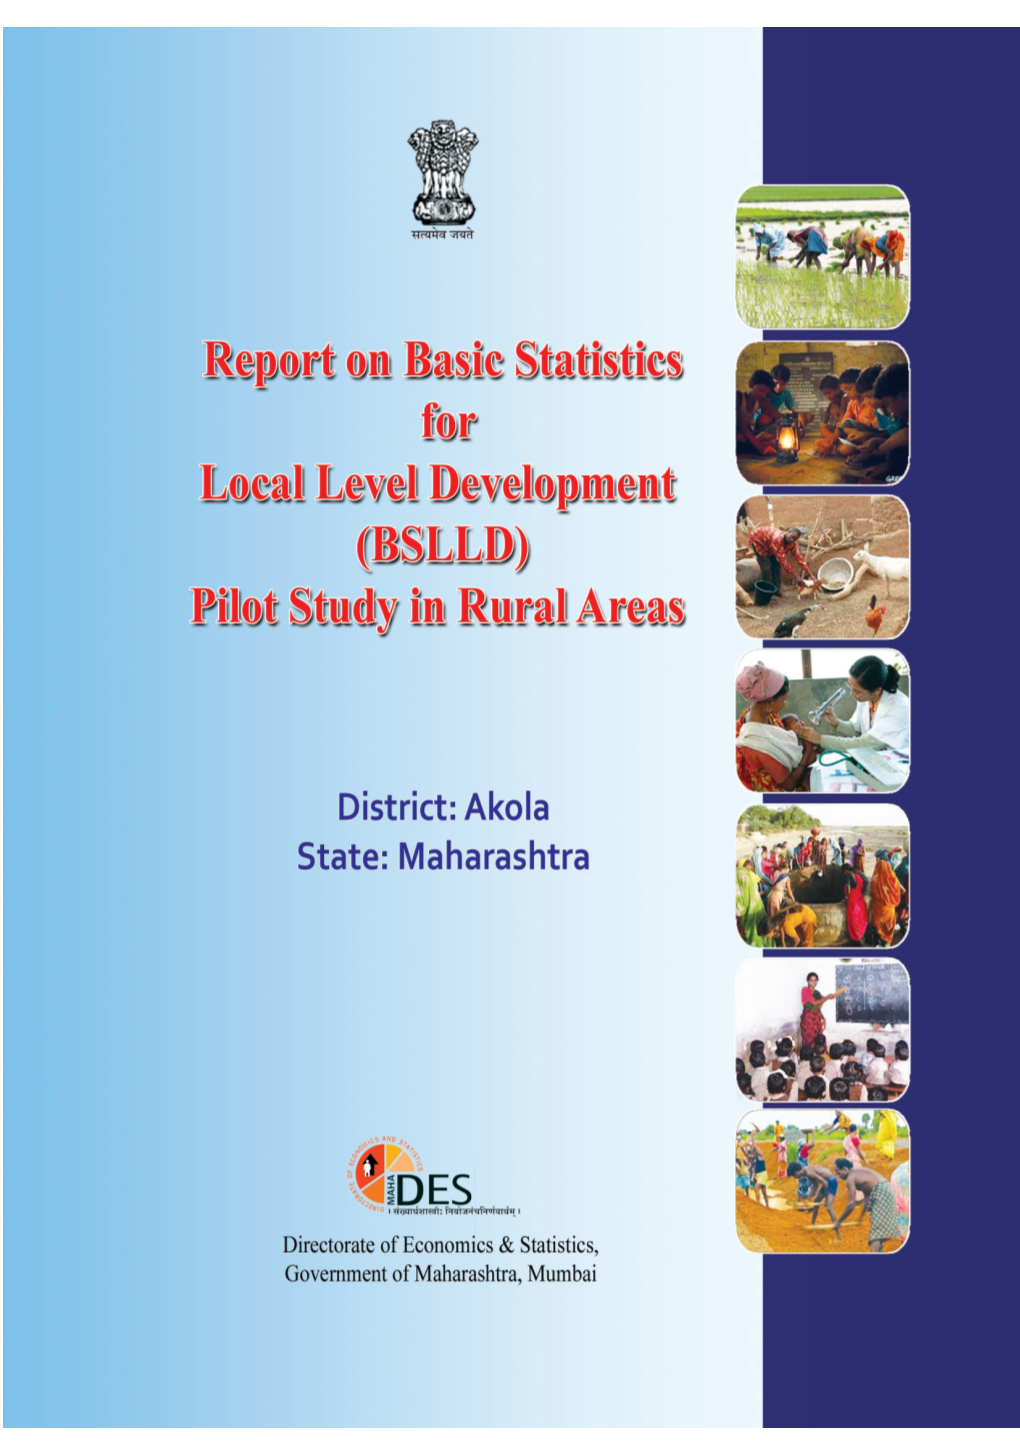 Pilot Study in Rural Areas District